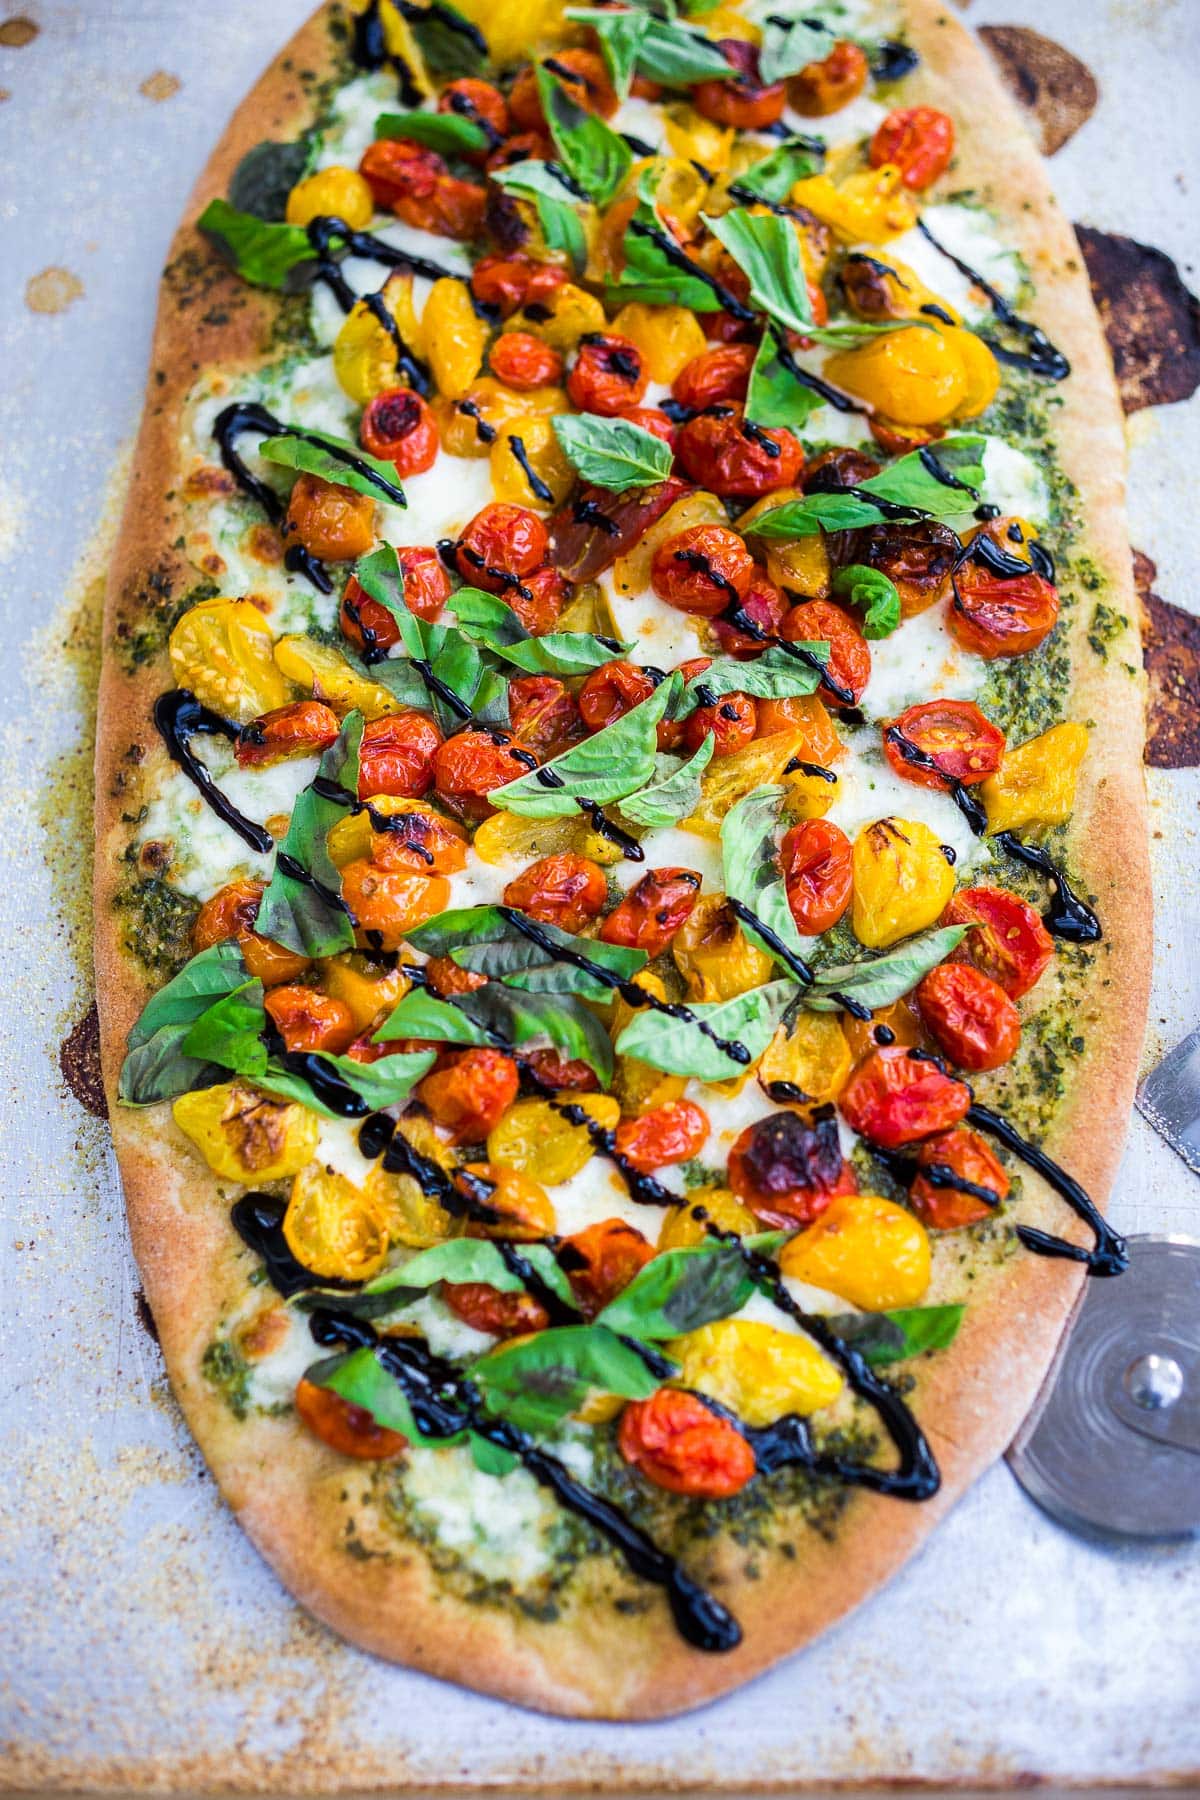 Make a simple, delicious Caprese Pizza with tomatoes, fresh mozzarella, basil leaves and basil oil topped with a balsamic glaze. Use store-bought pizza dough or make your own!